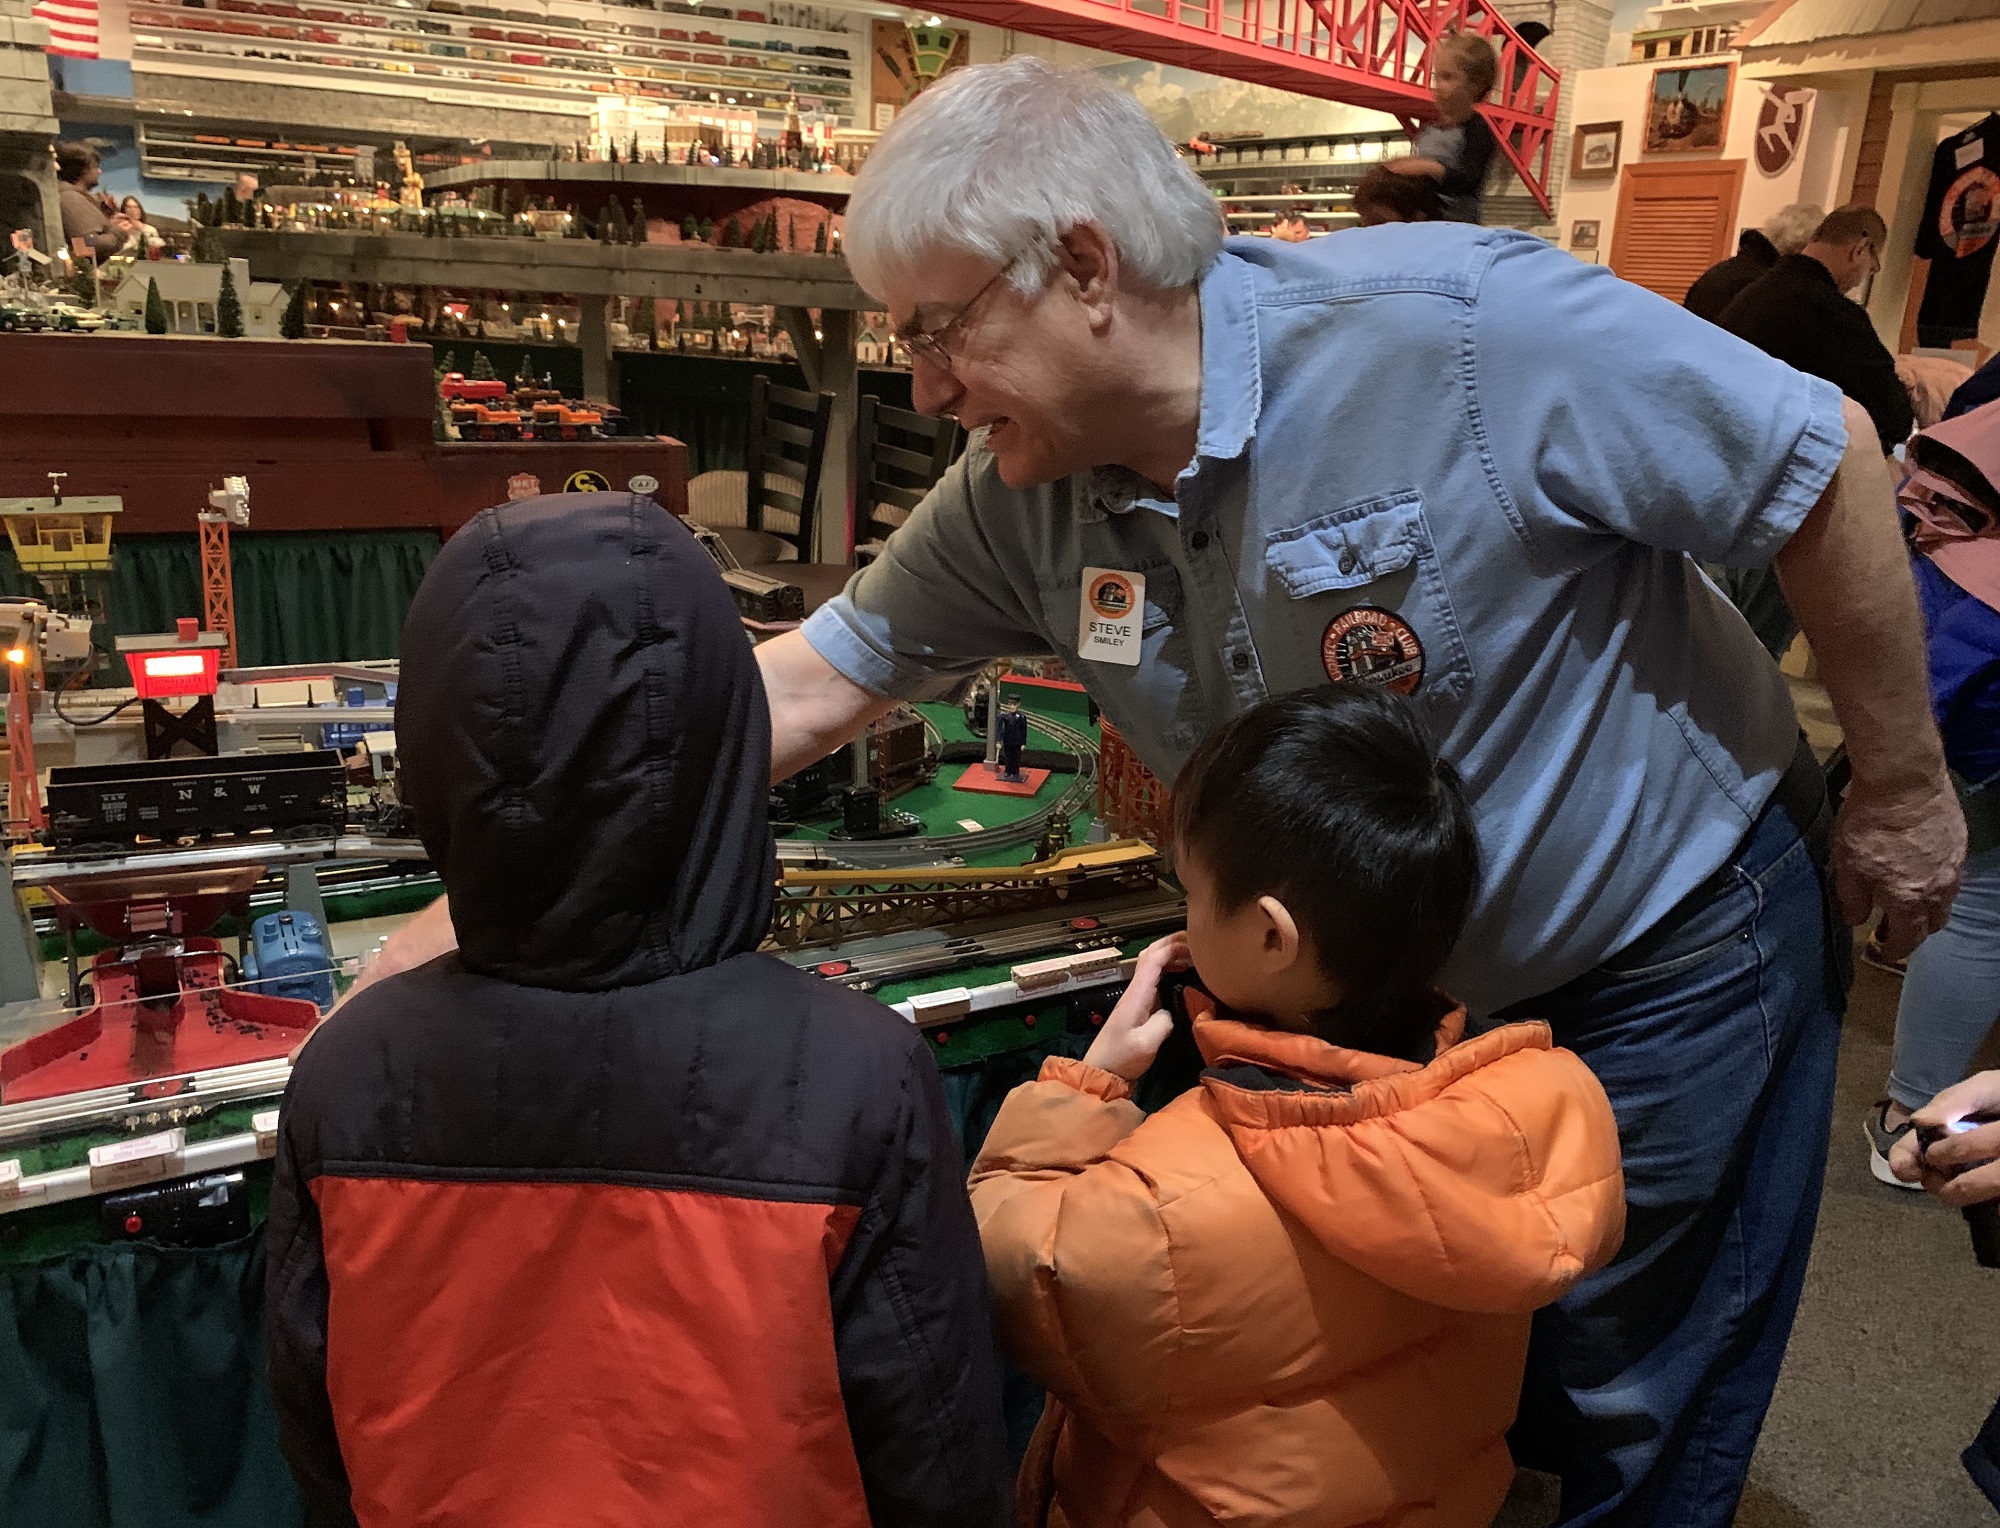 Lionel Railroad Club President Steve smiley and shows trains to the Wu siblings of New Berlin, Wisconsin. (Photo by Jane Hampden)